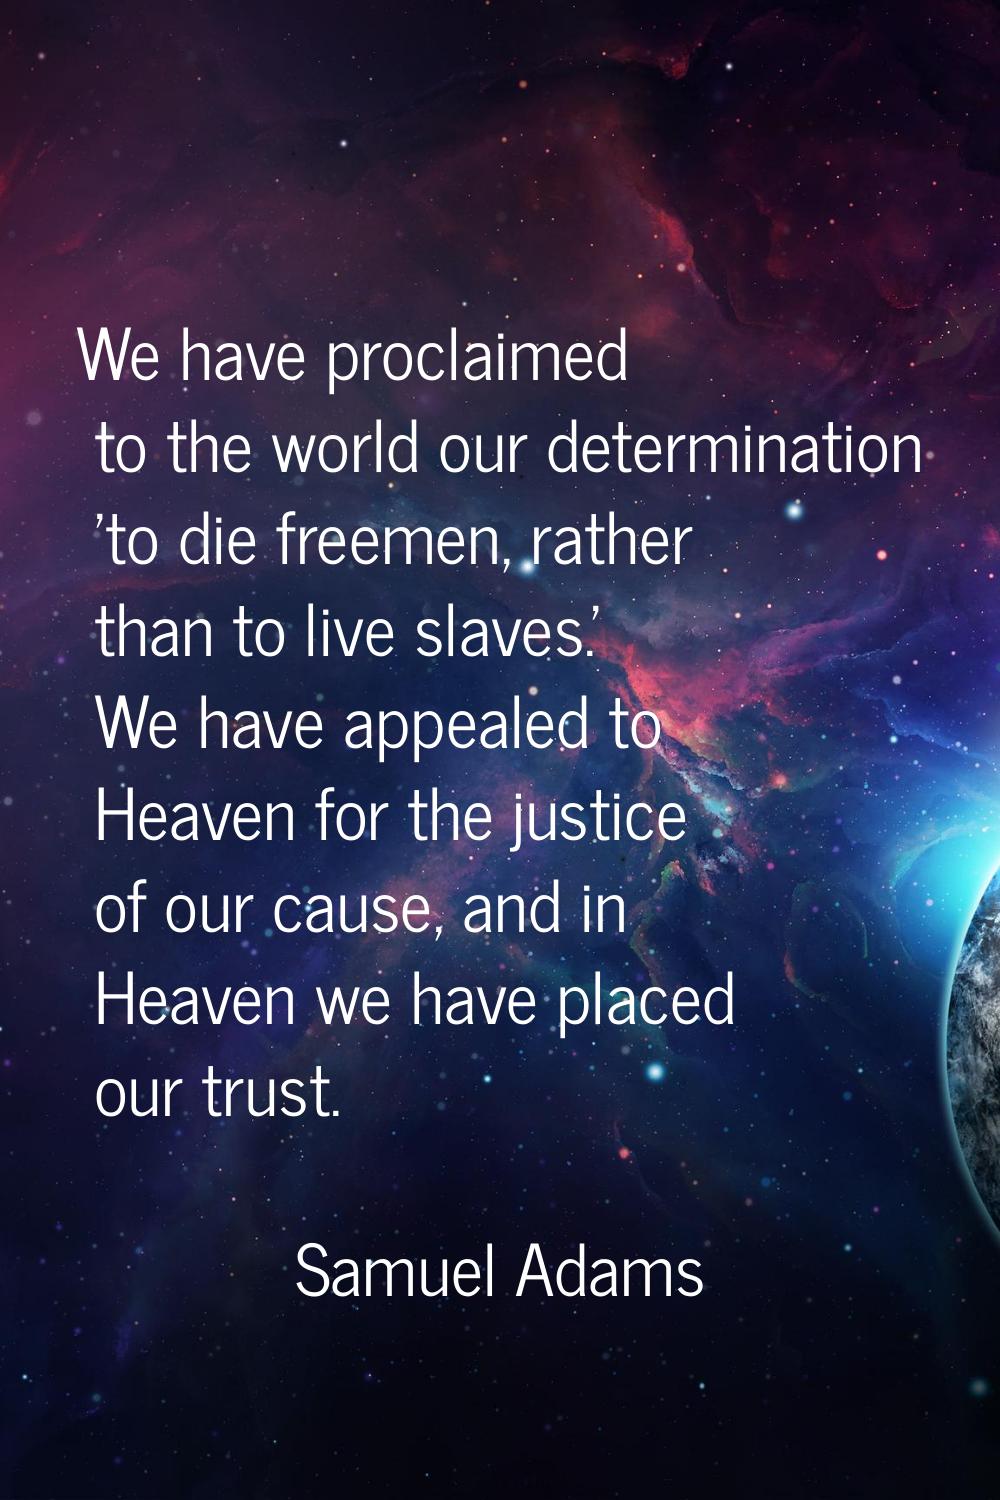 We have proclaimed to the world our determination 'to die freemen, rather than to live slaves.' We 